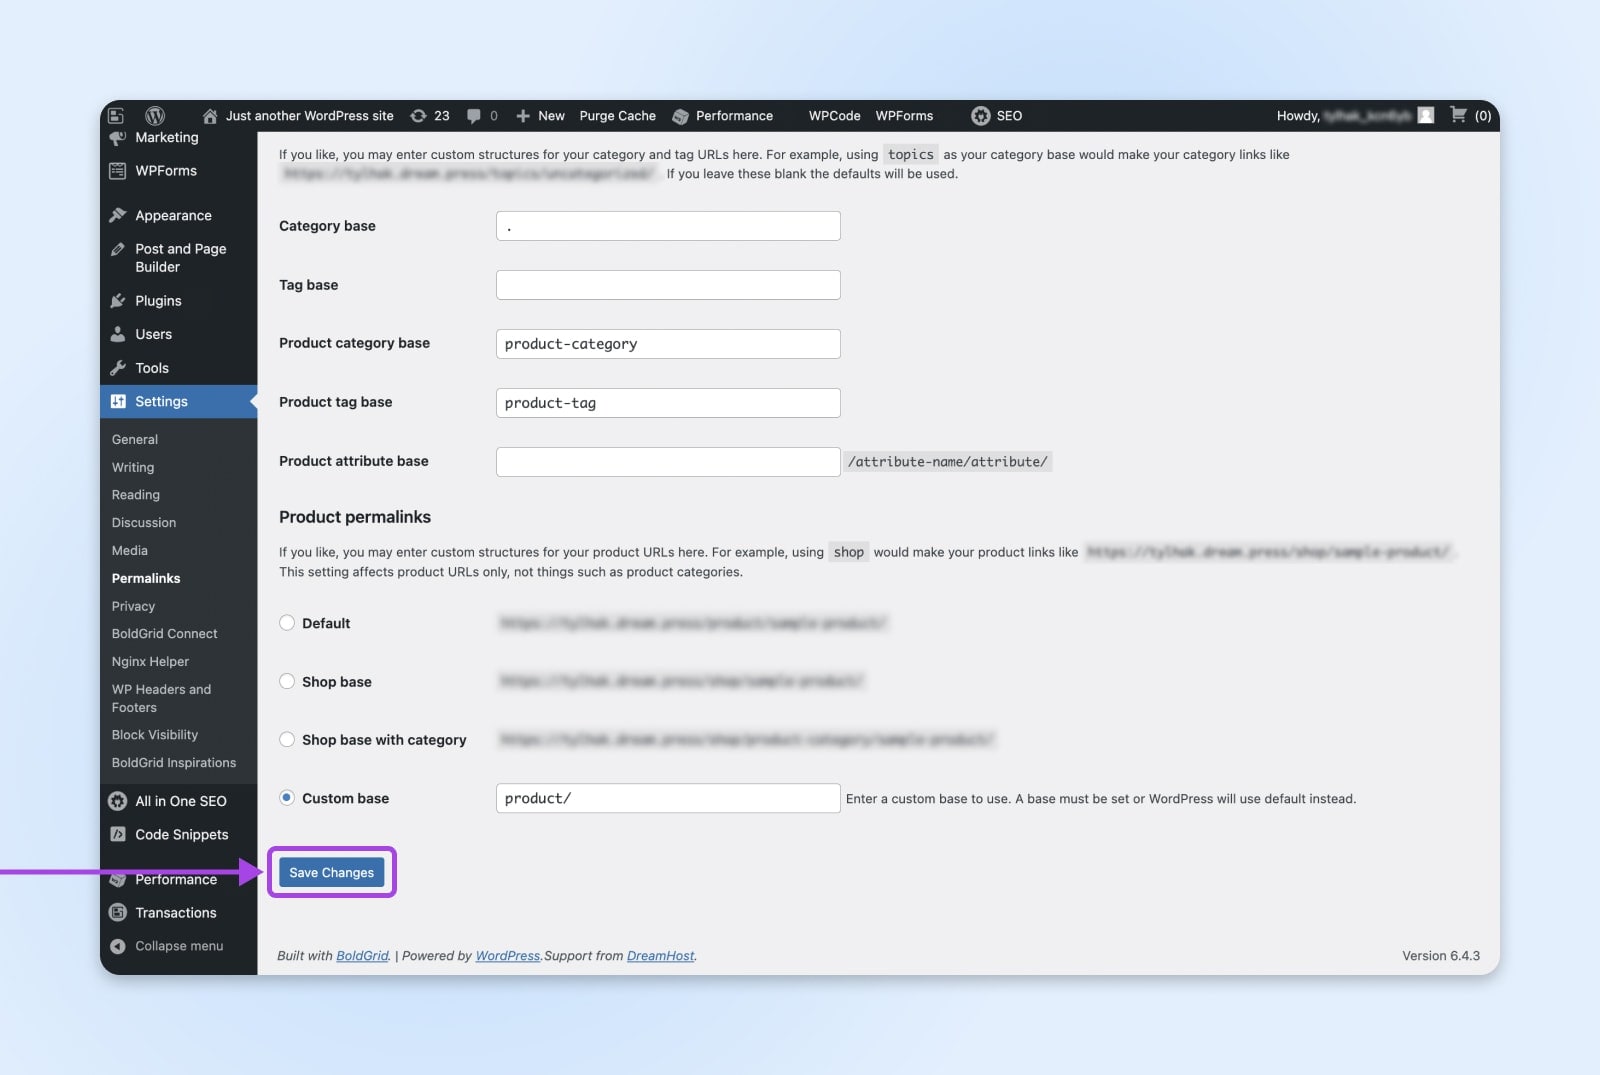 A purple arrow points to the blue Save Changes button in the Settings page of the WordPress dashboard